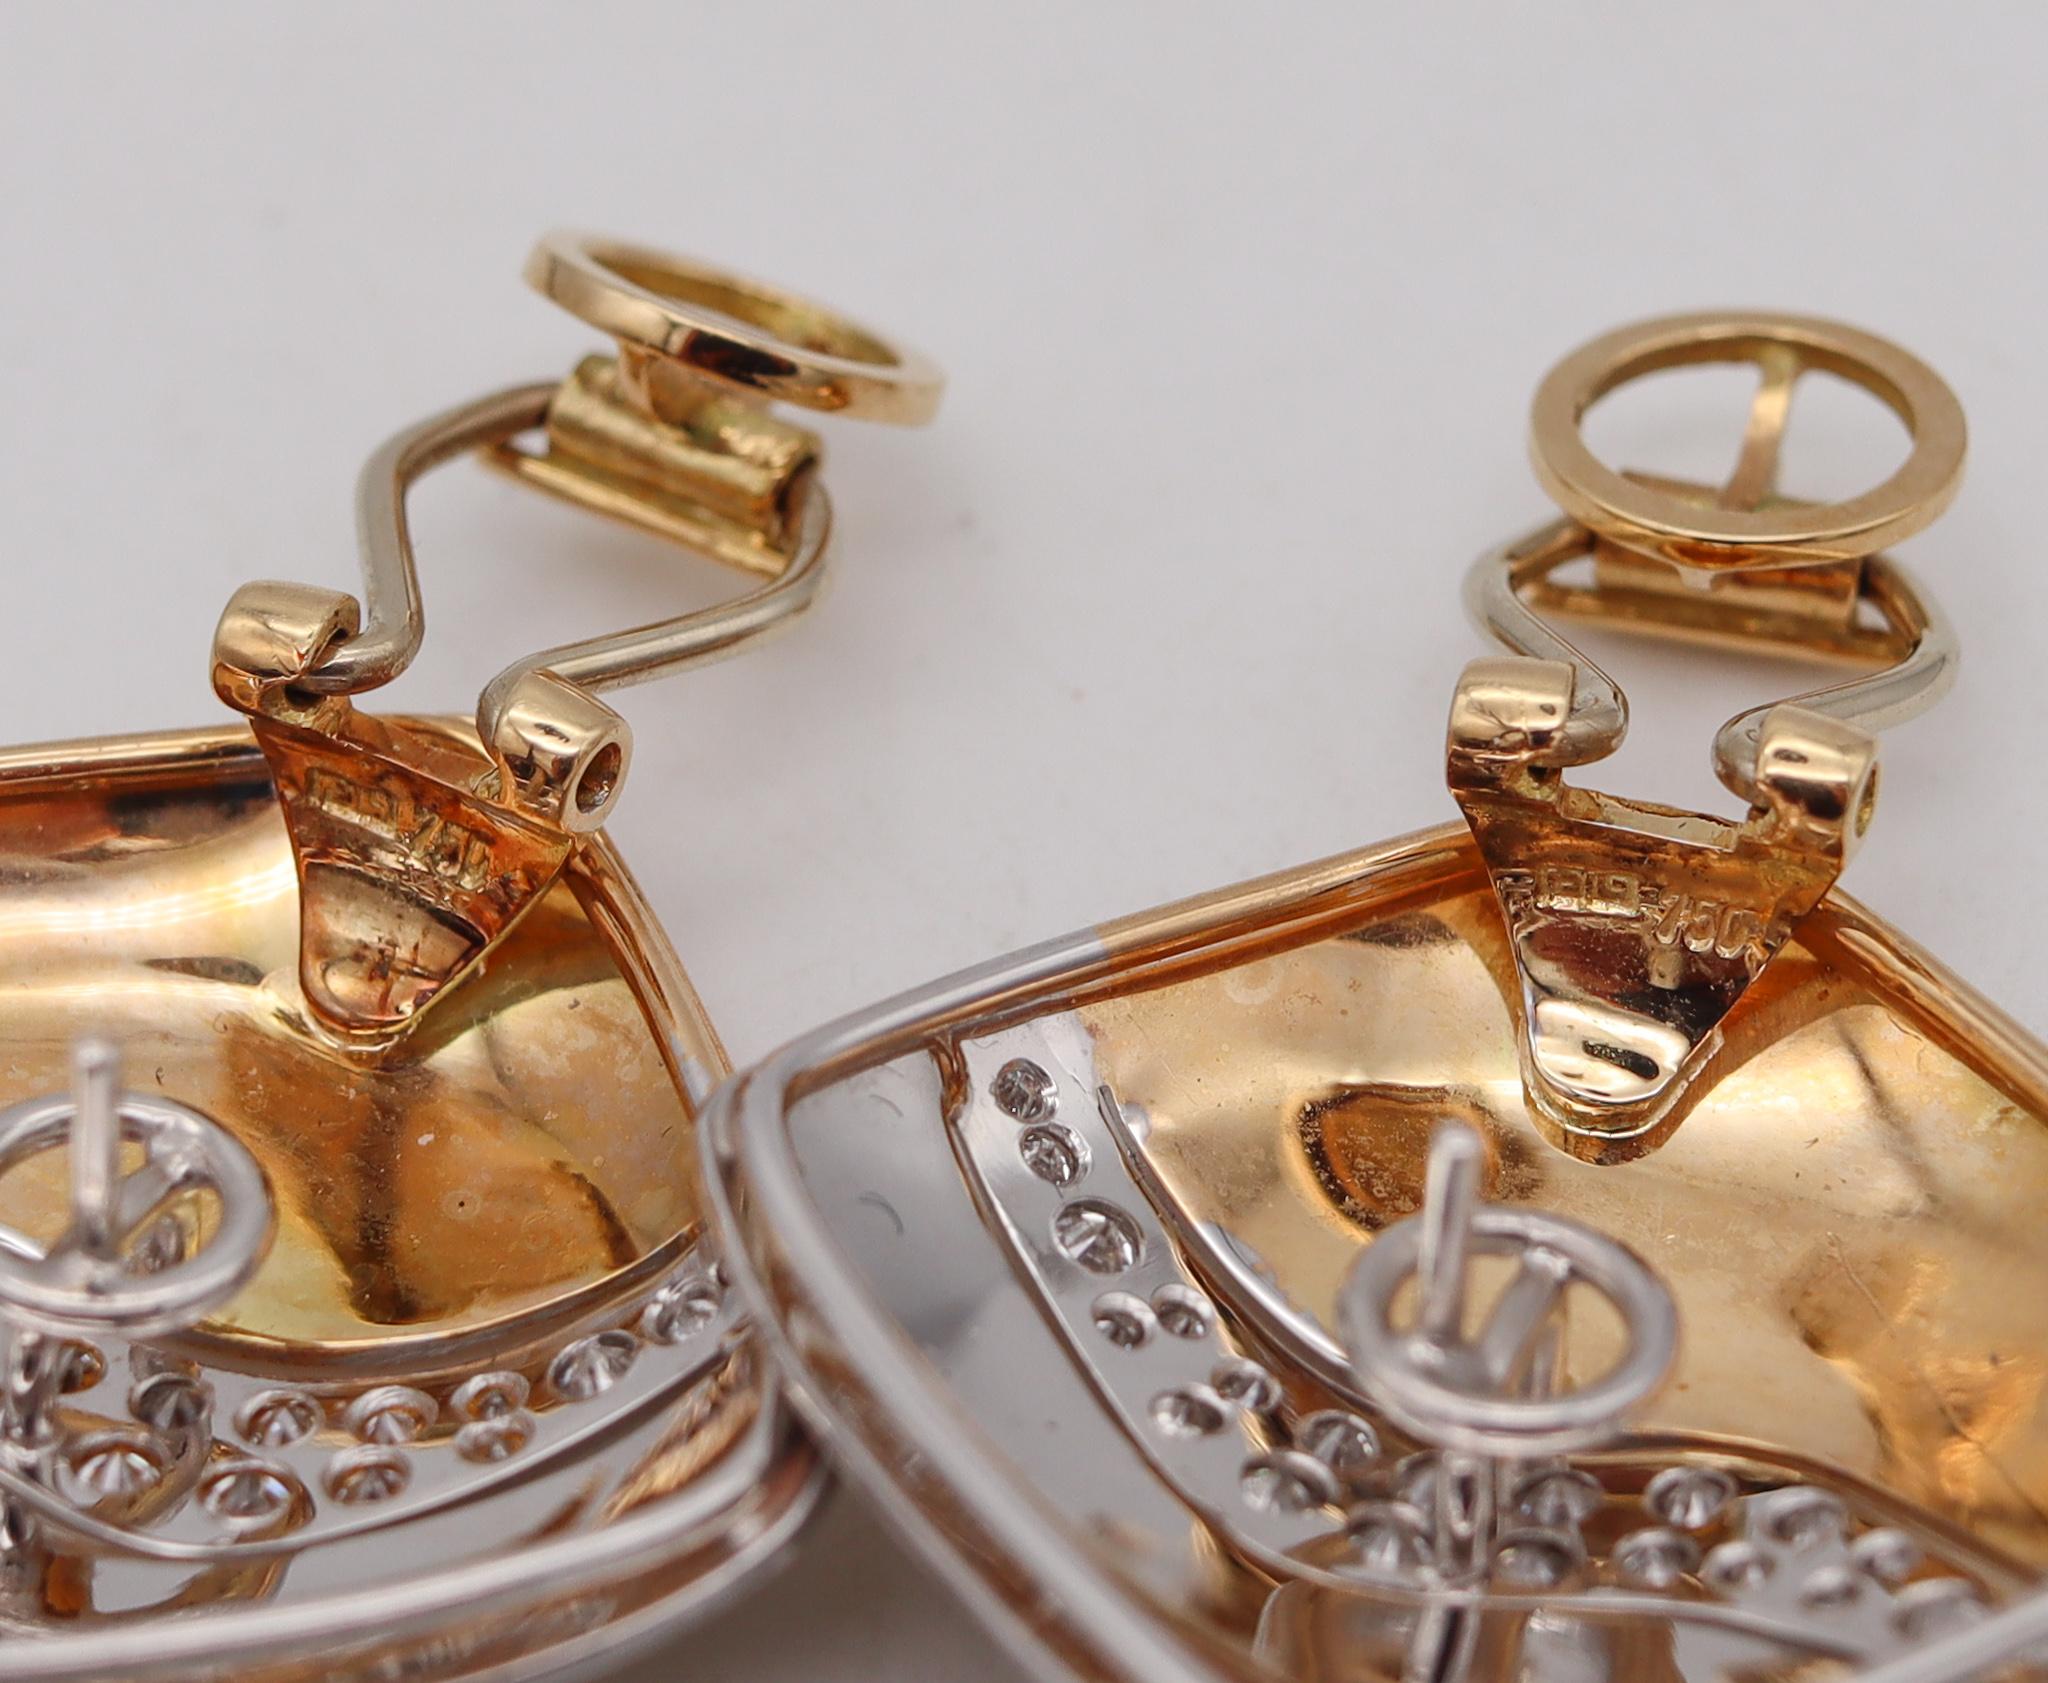 Modernist Paul Binder 1970 Zurich Two Tones Clips Earrings 18kt Gold with 2.24 Cts Diamond